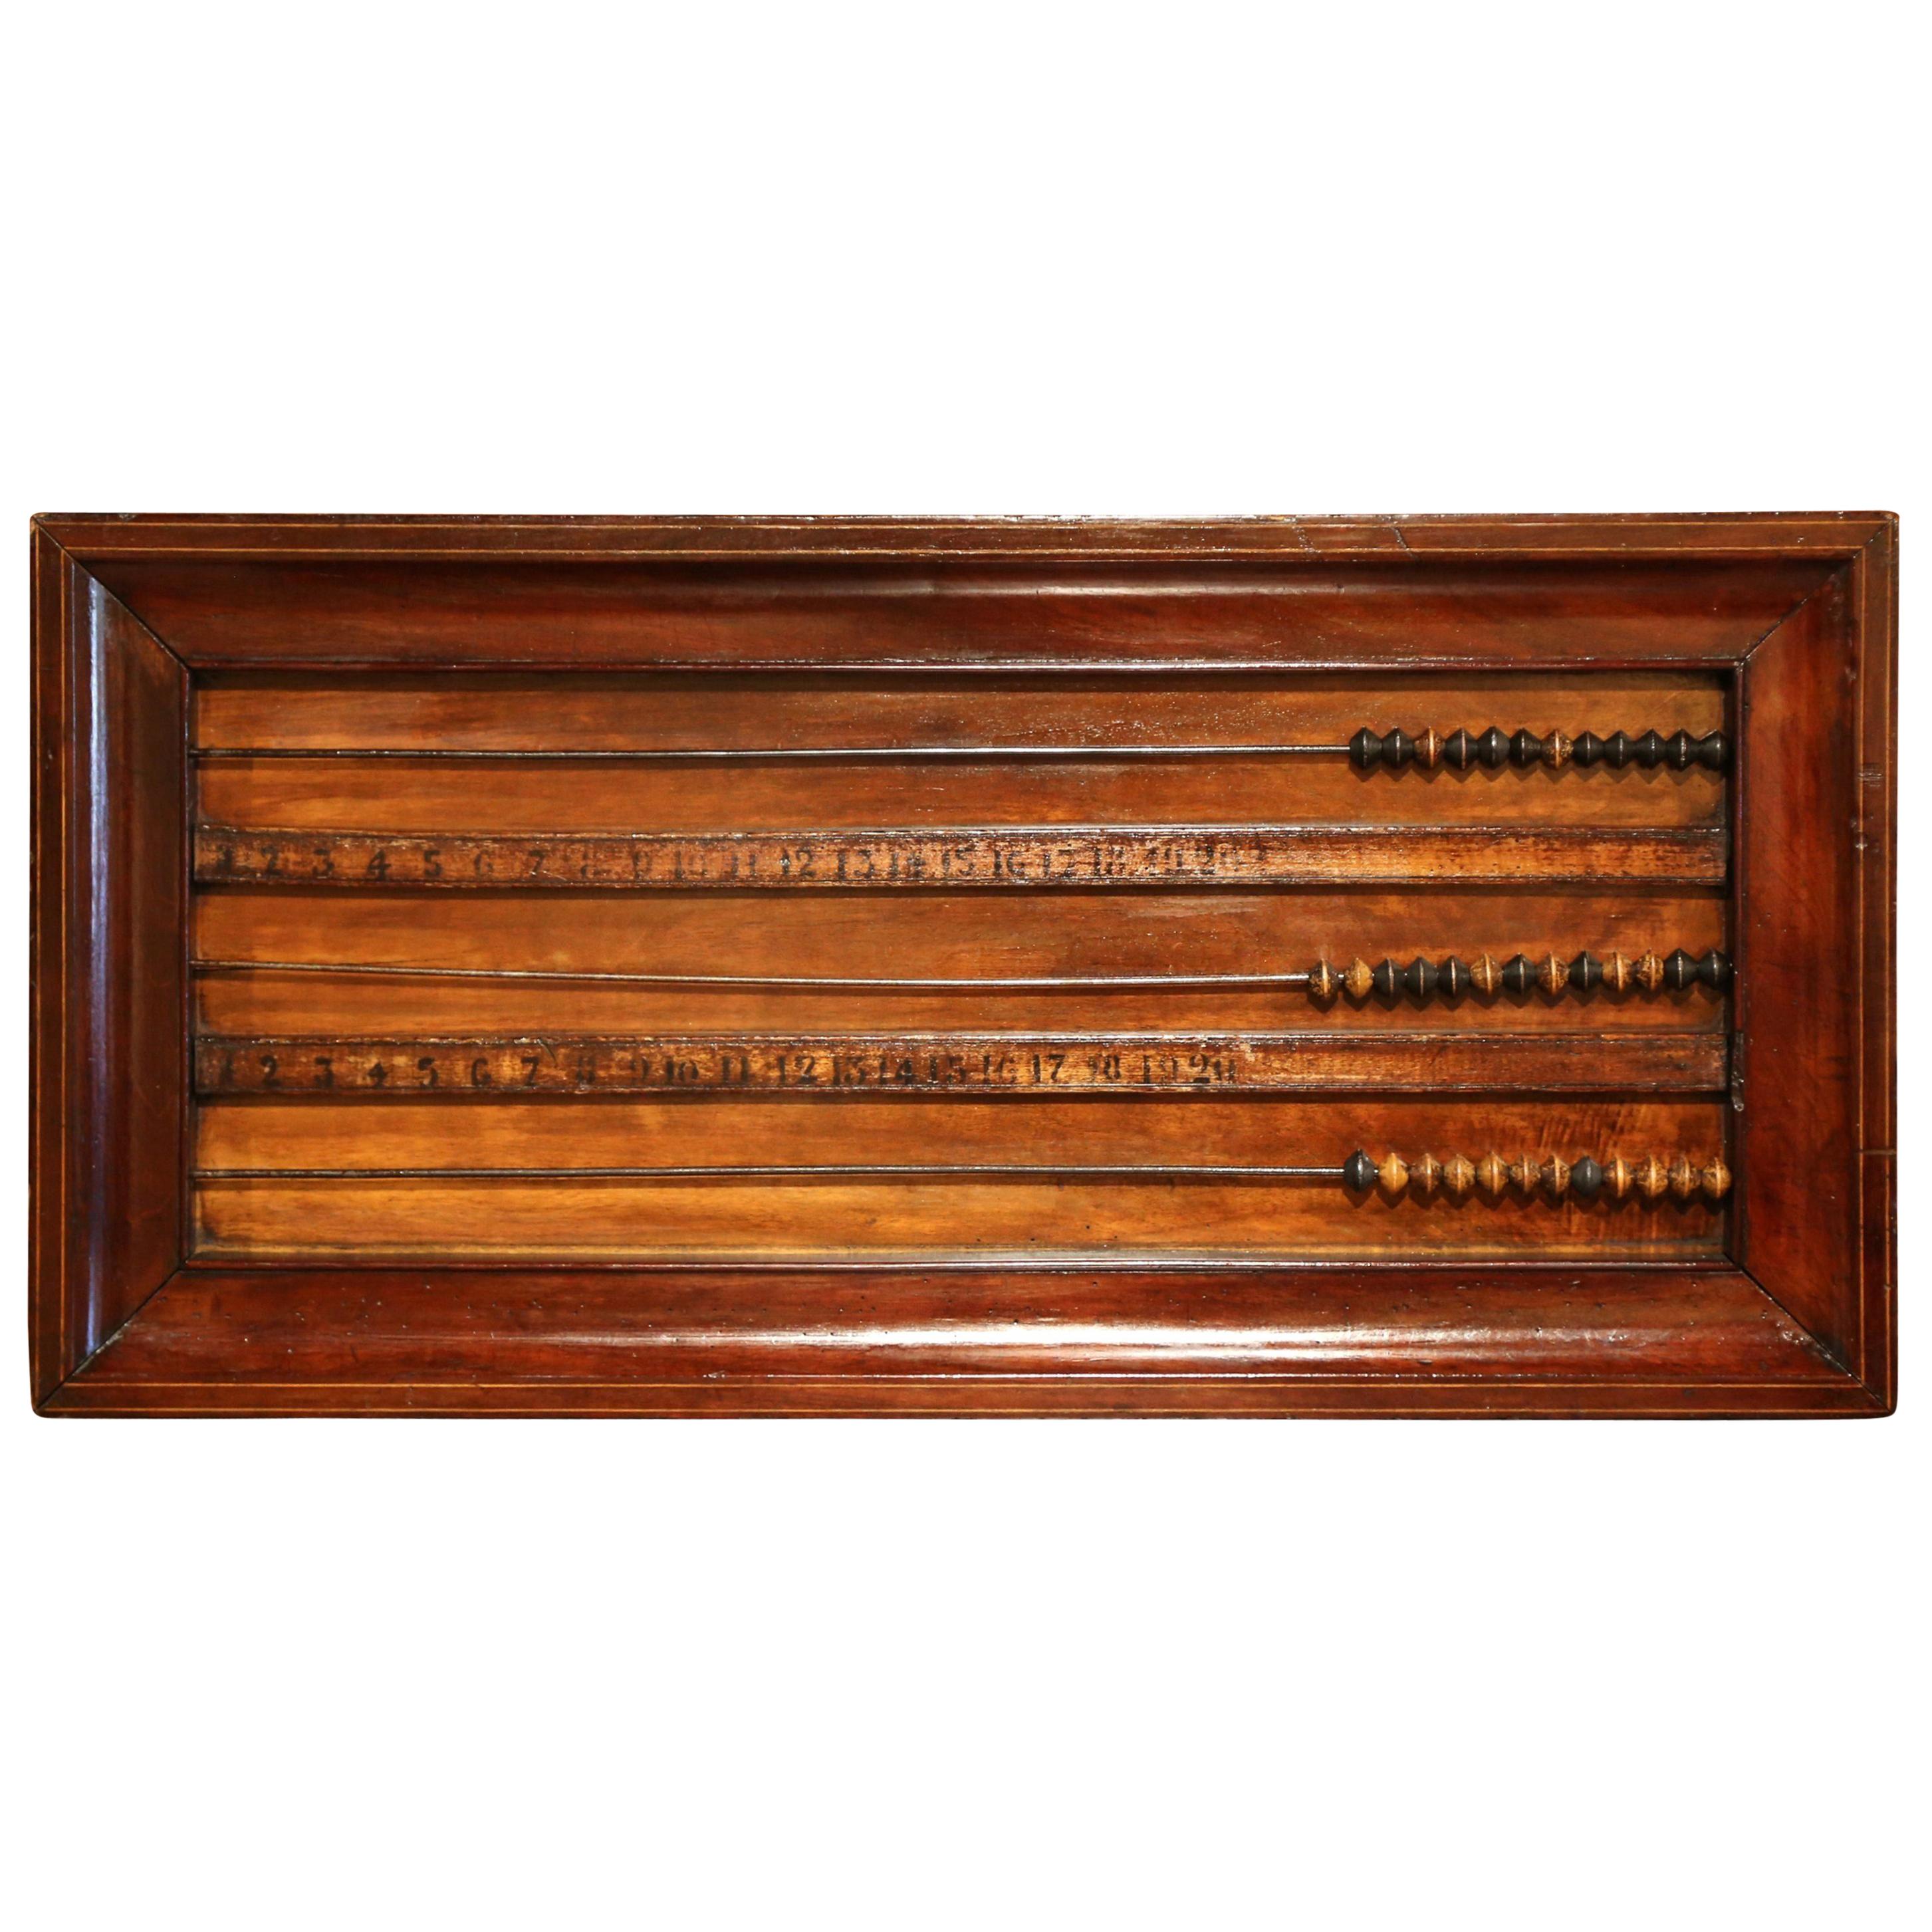 19th Century French Carved Walnut Wall Hanging Billiard Abacus or Boulier